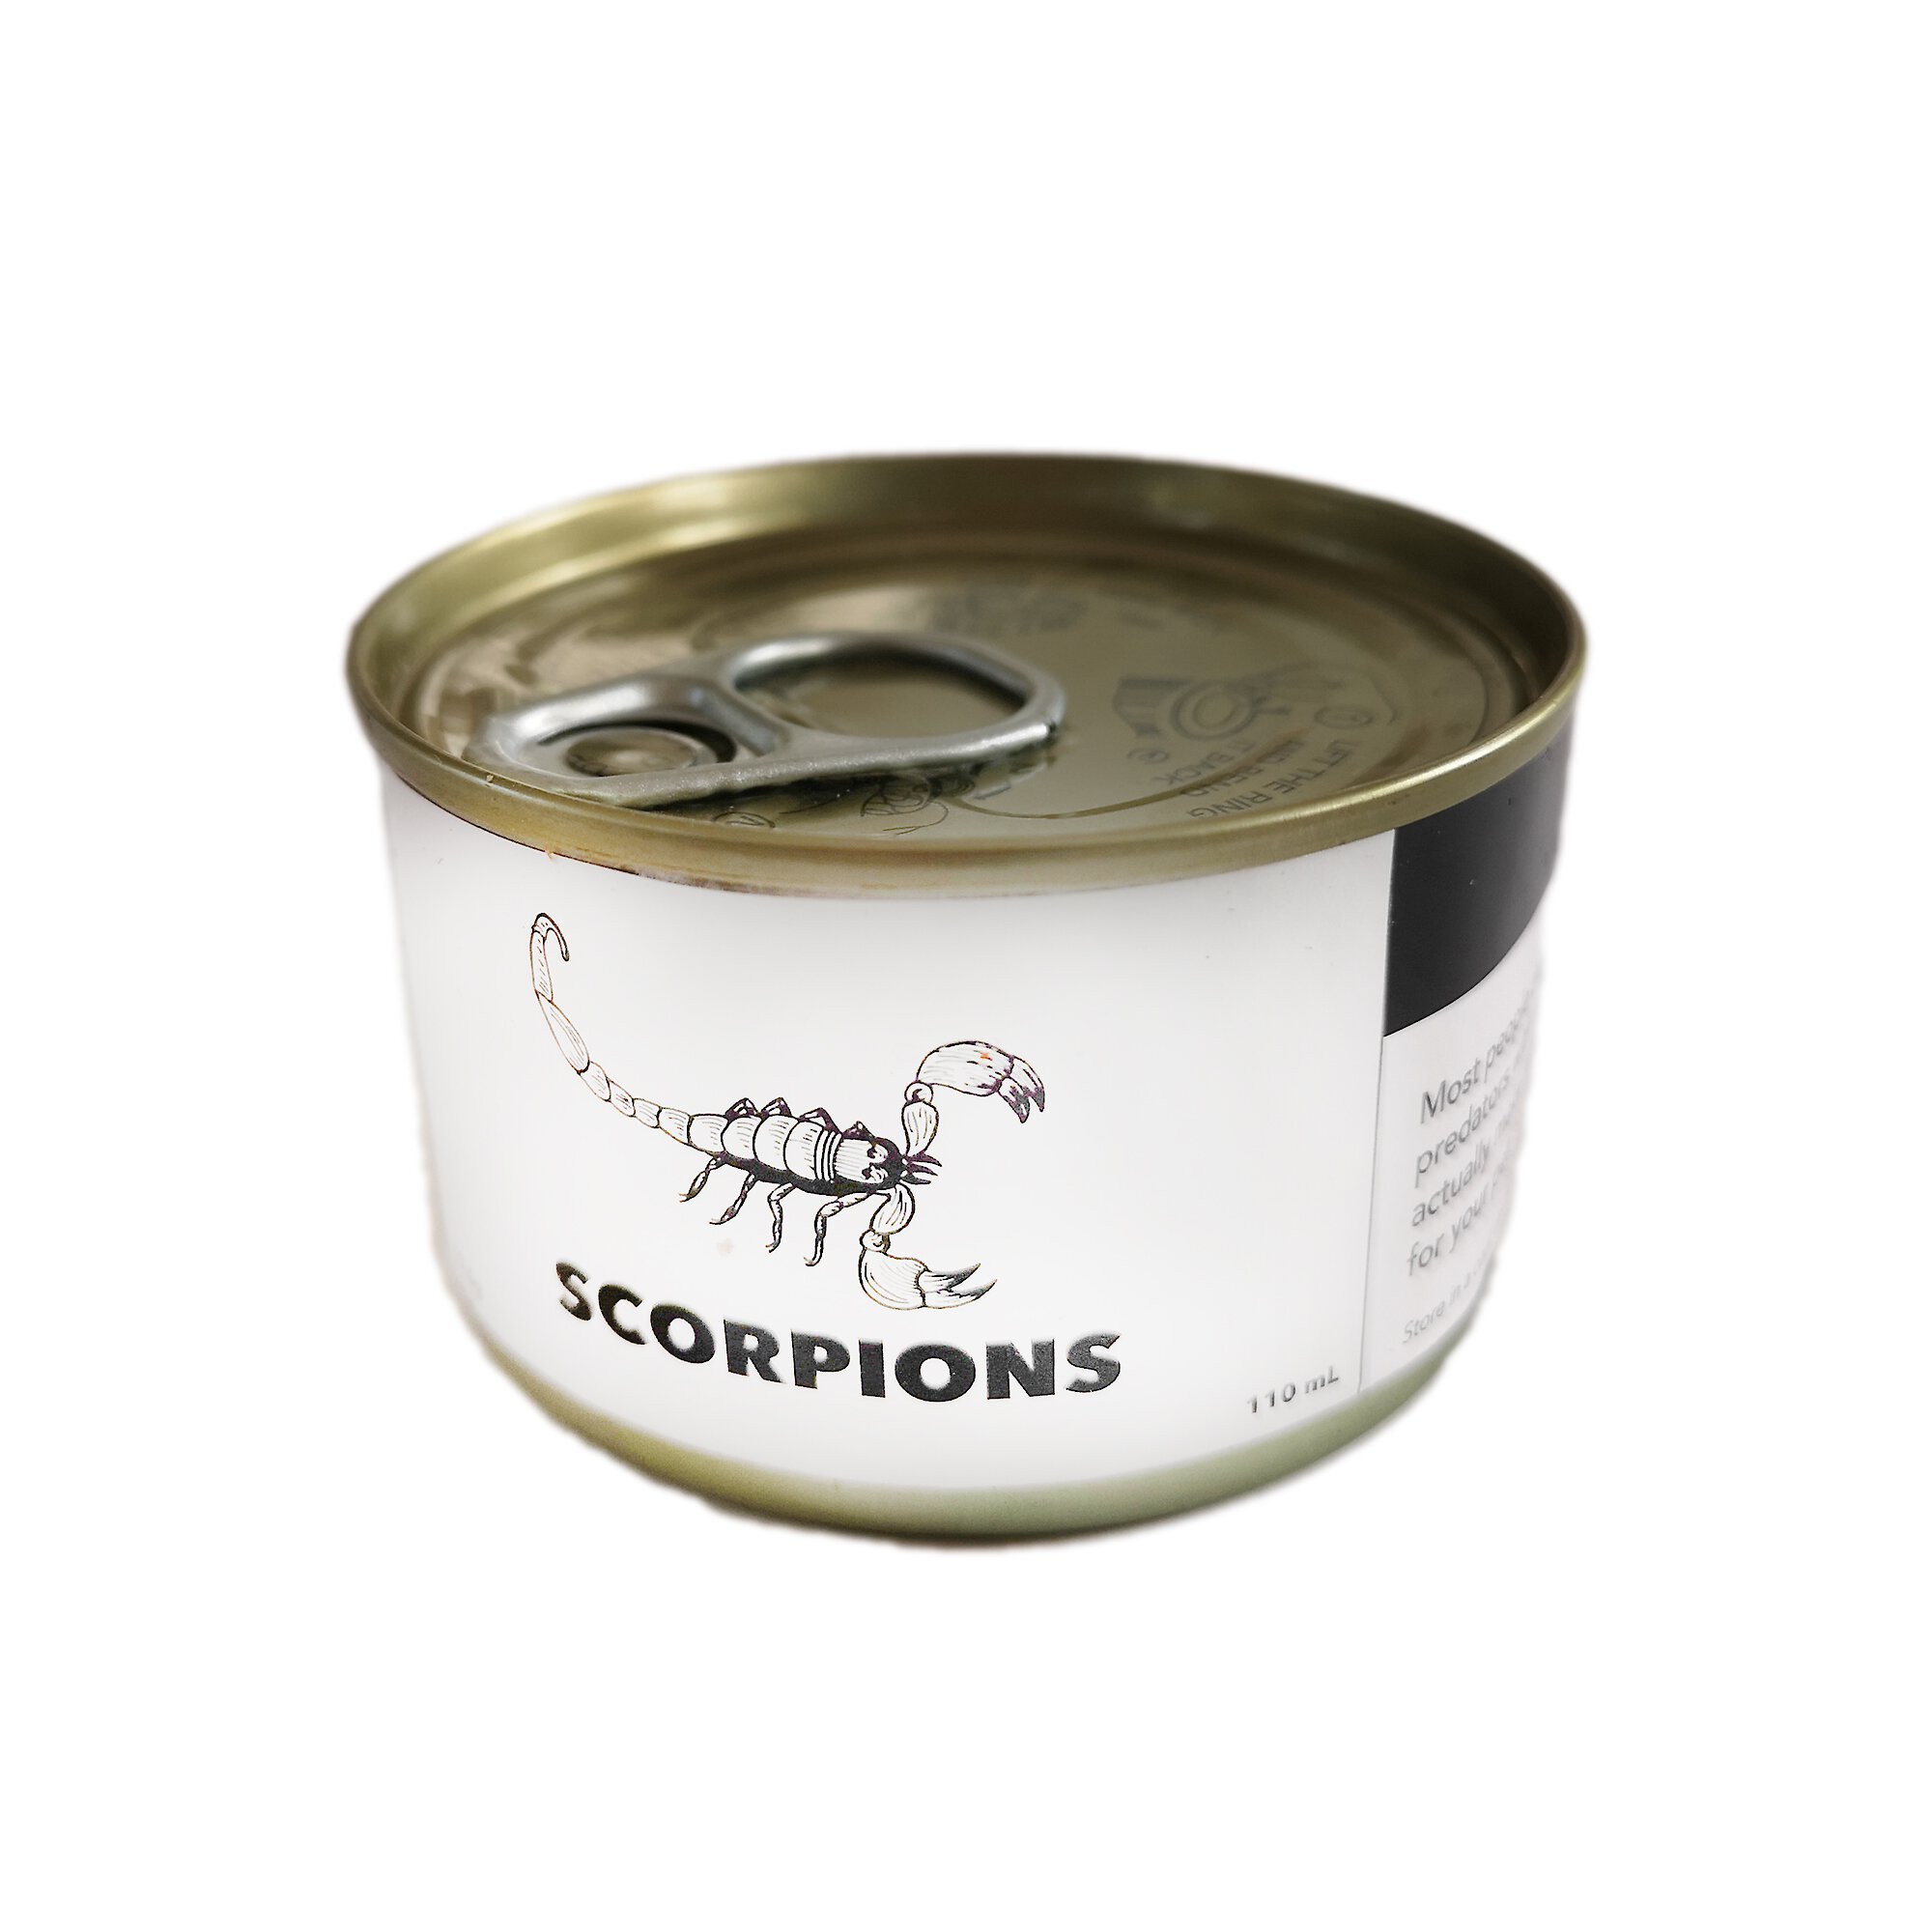 Scorpions Canned Reptile Treats, 17.5-g, count of 3